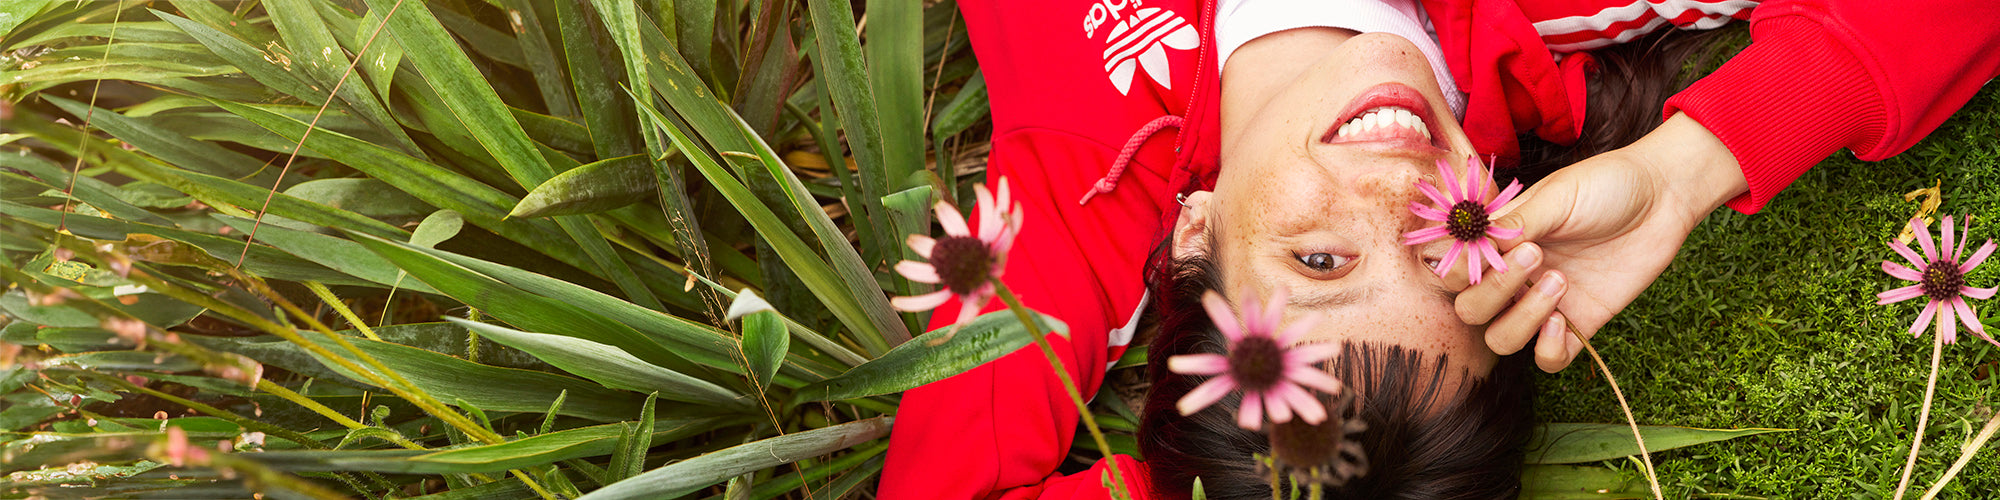 Model lying down in long grass holding a flower over one eye. She is wearing a red tracksuit top.